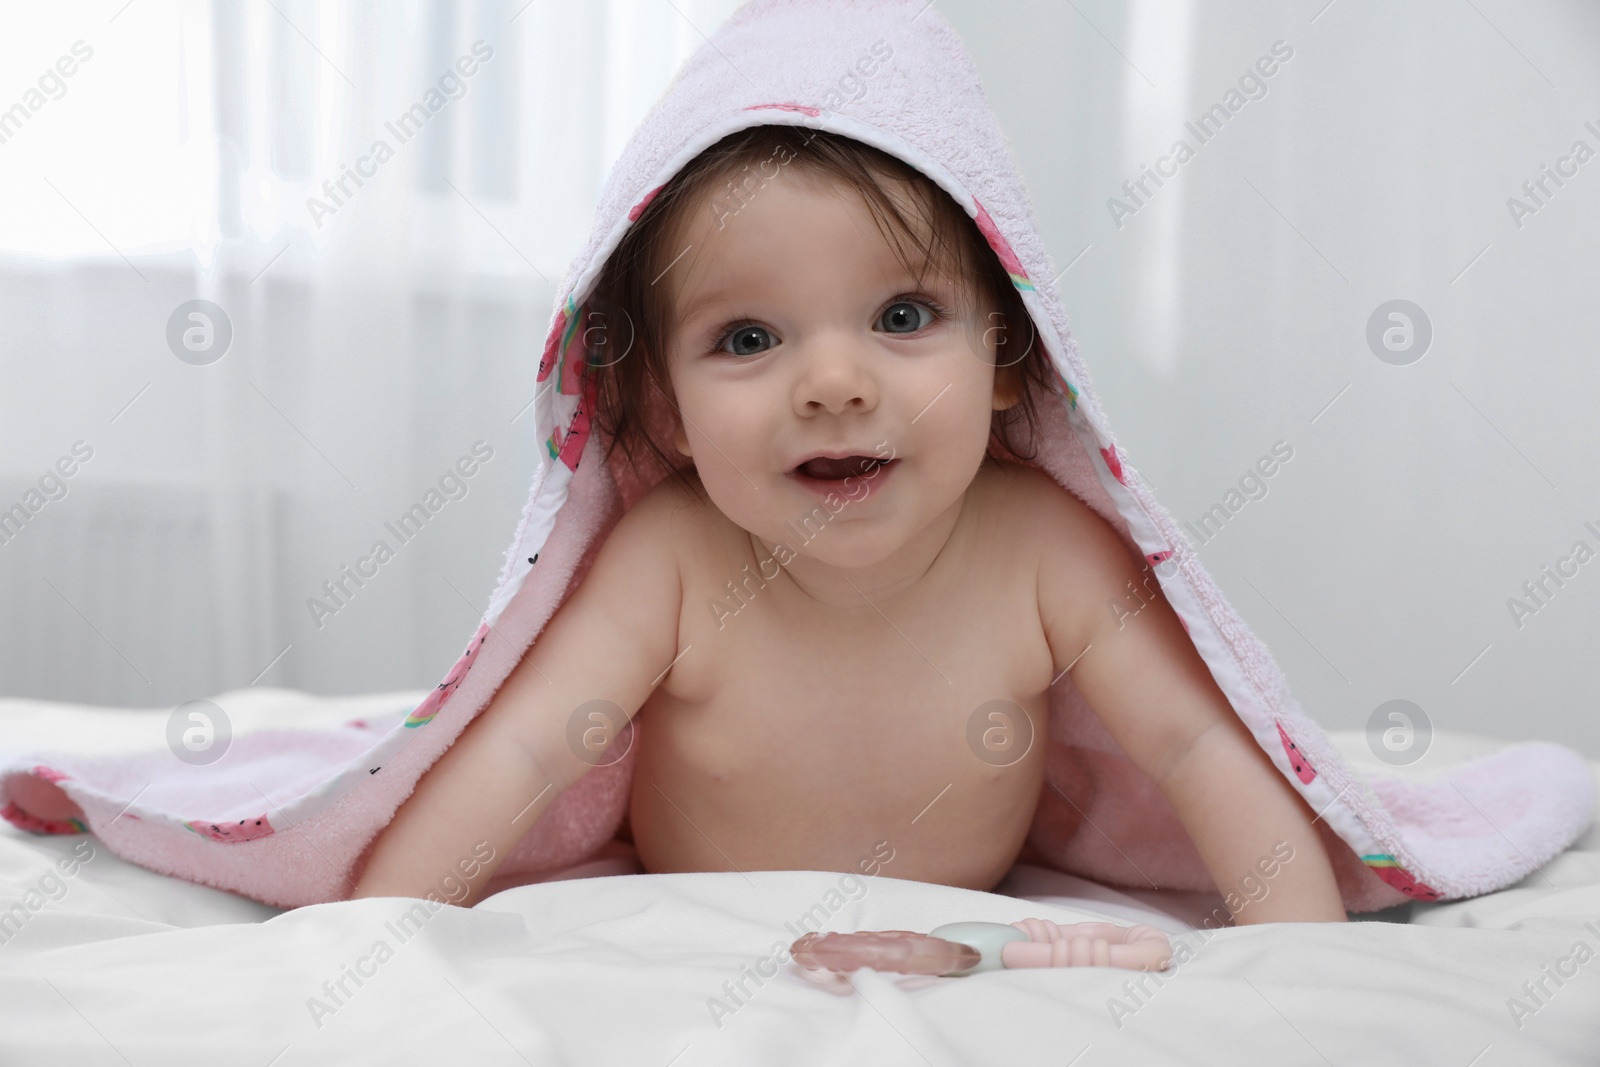 Photo of Cute little baby in hooded towel after bathing on bed at home